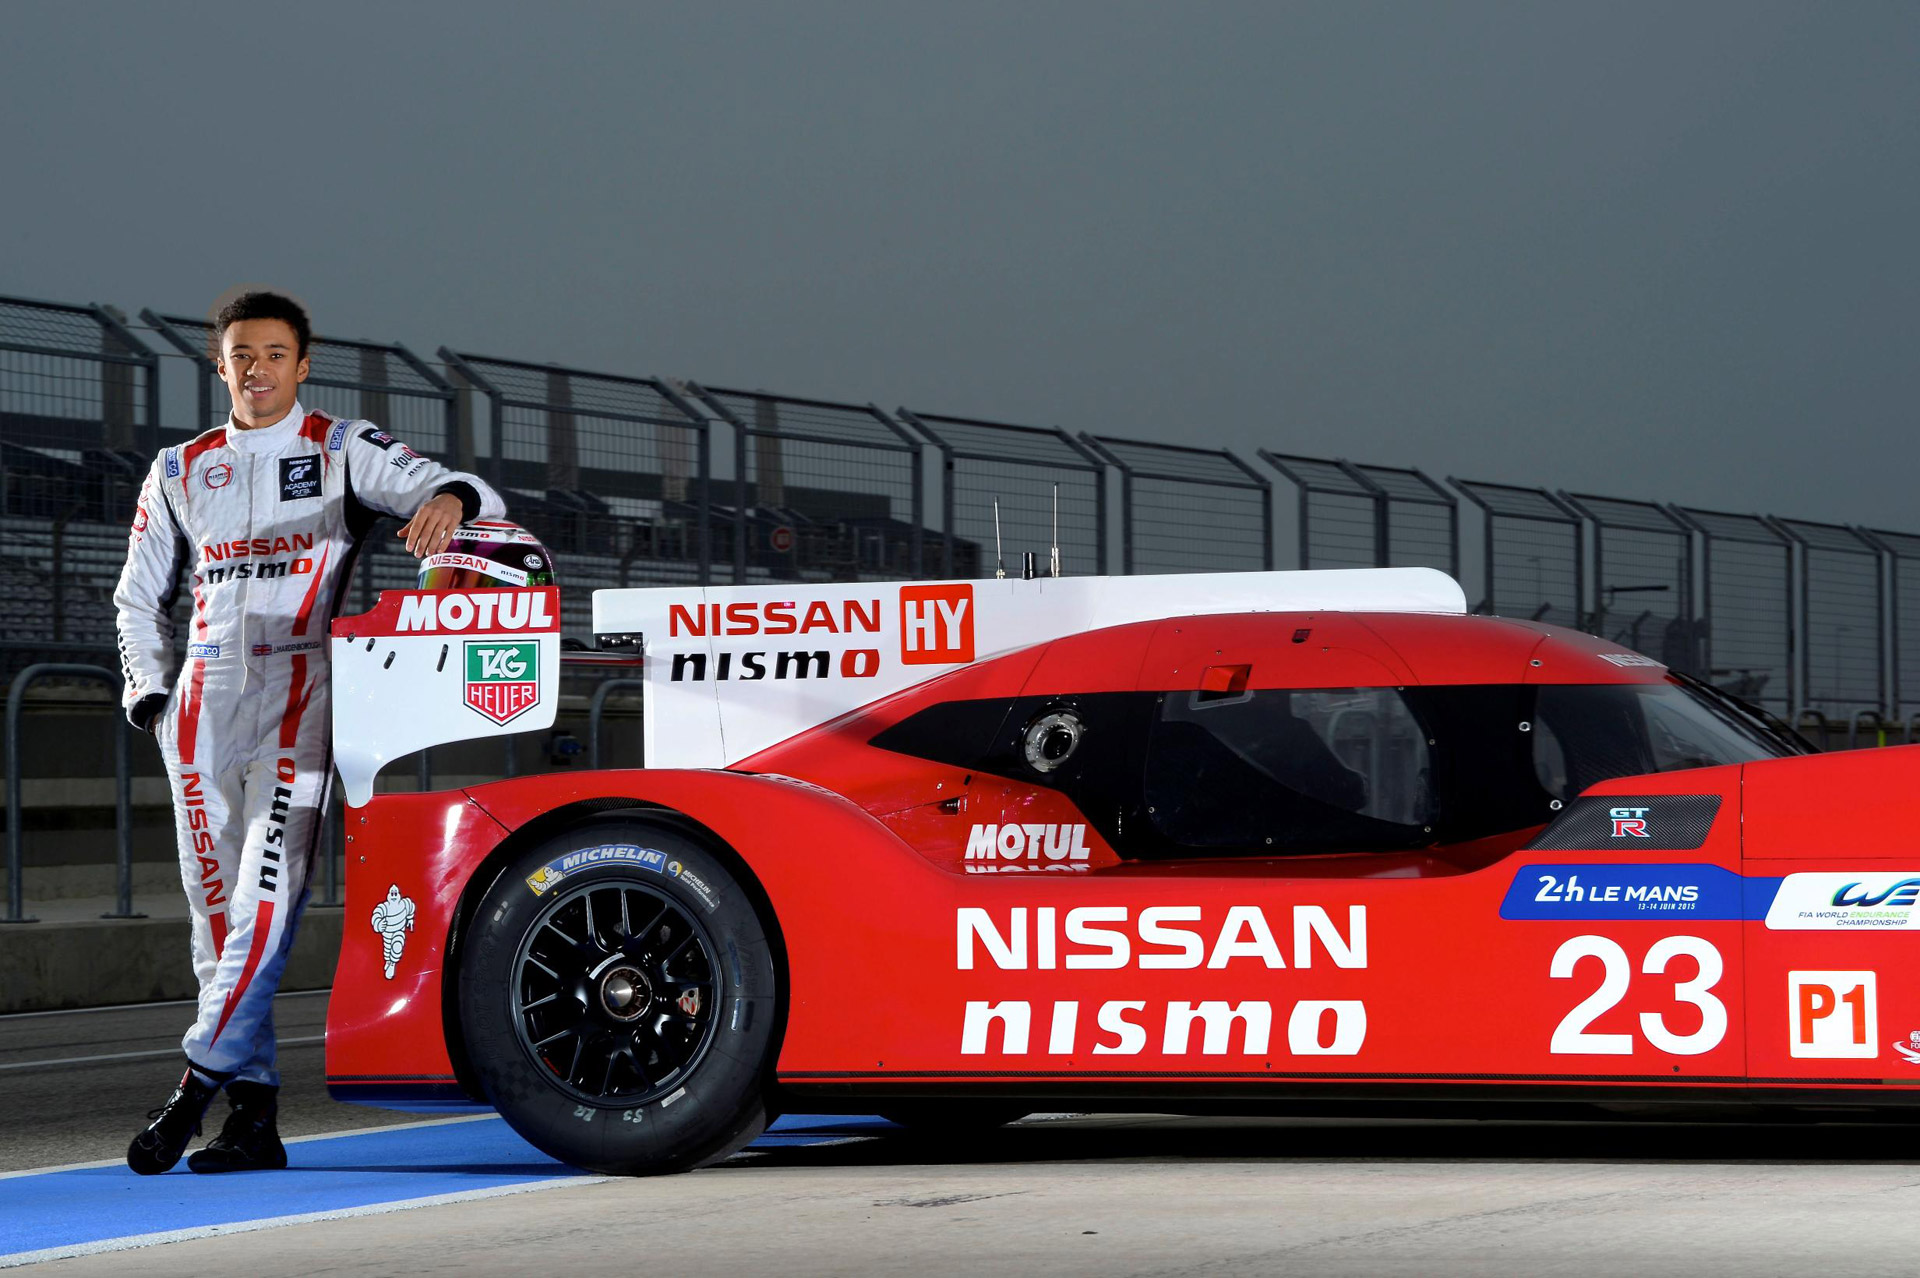 Gamers Turned Racers To Pilot Nissan GTR LM NISMO LMP1 At Le Mans